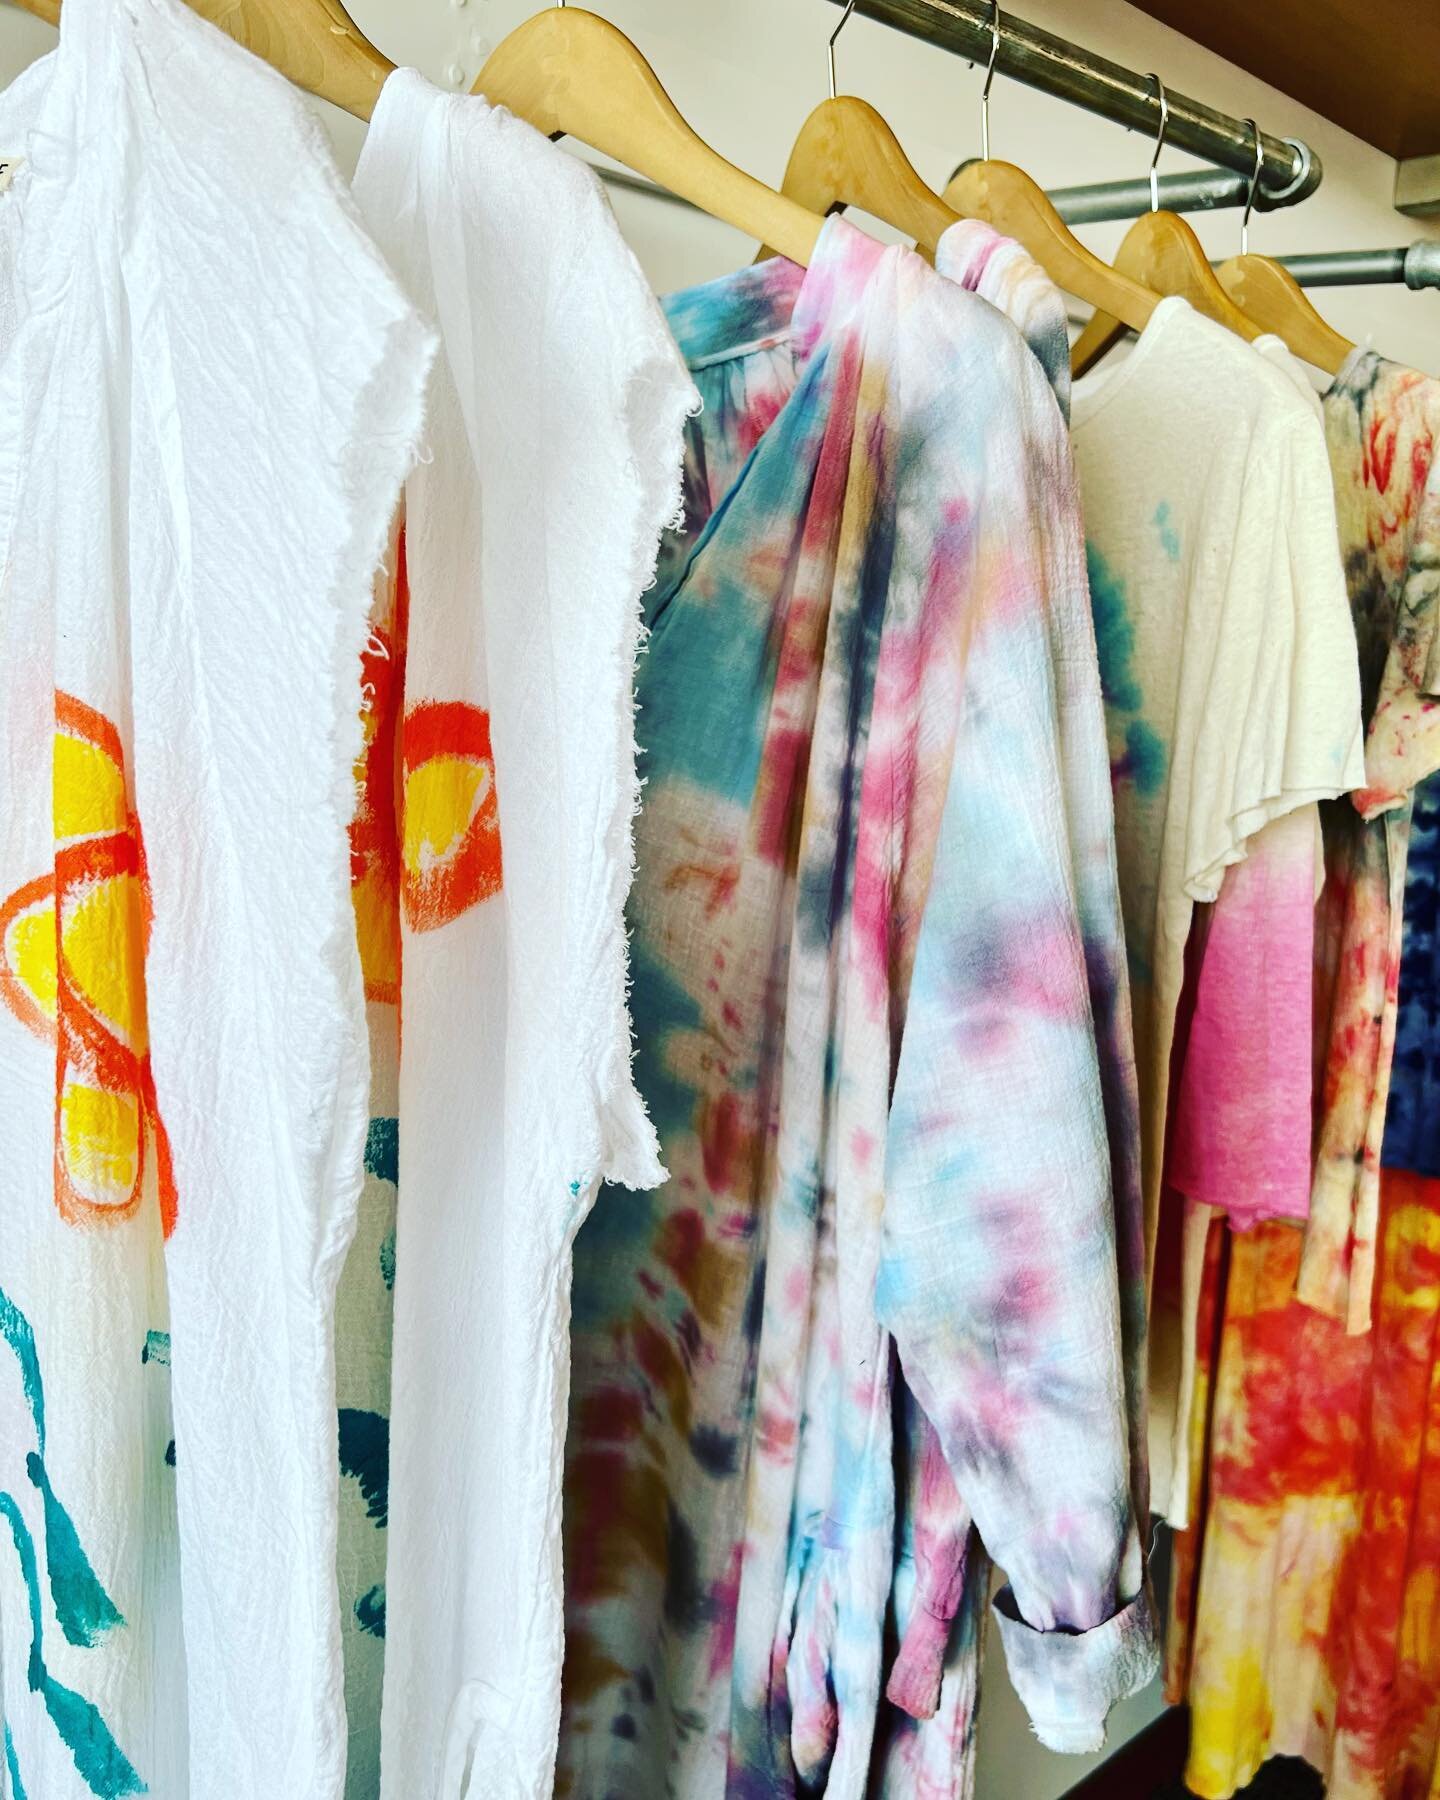 🌈 

.
.
.
.
.

#handdyed 
#shoplocal
#oneofakind 
#art 
#arizona 
#scottsdale 
#phoenix 
#artist 
#oneofakind 
#ootd 
#fashion 
#whattowear 
#style 
#daily
#new
#sedona 
#flagstaff 
#shopsmall 
#shoplocal 
#boutique 
#musthave
#womens fashion
#inspo